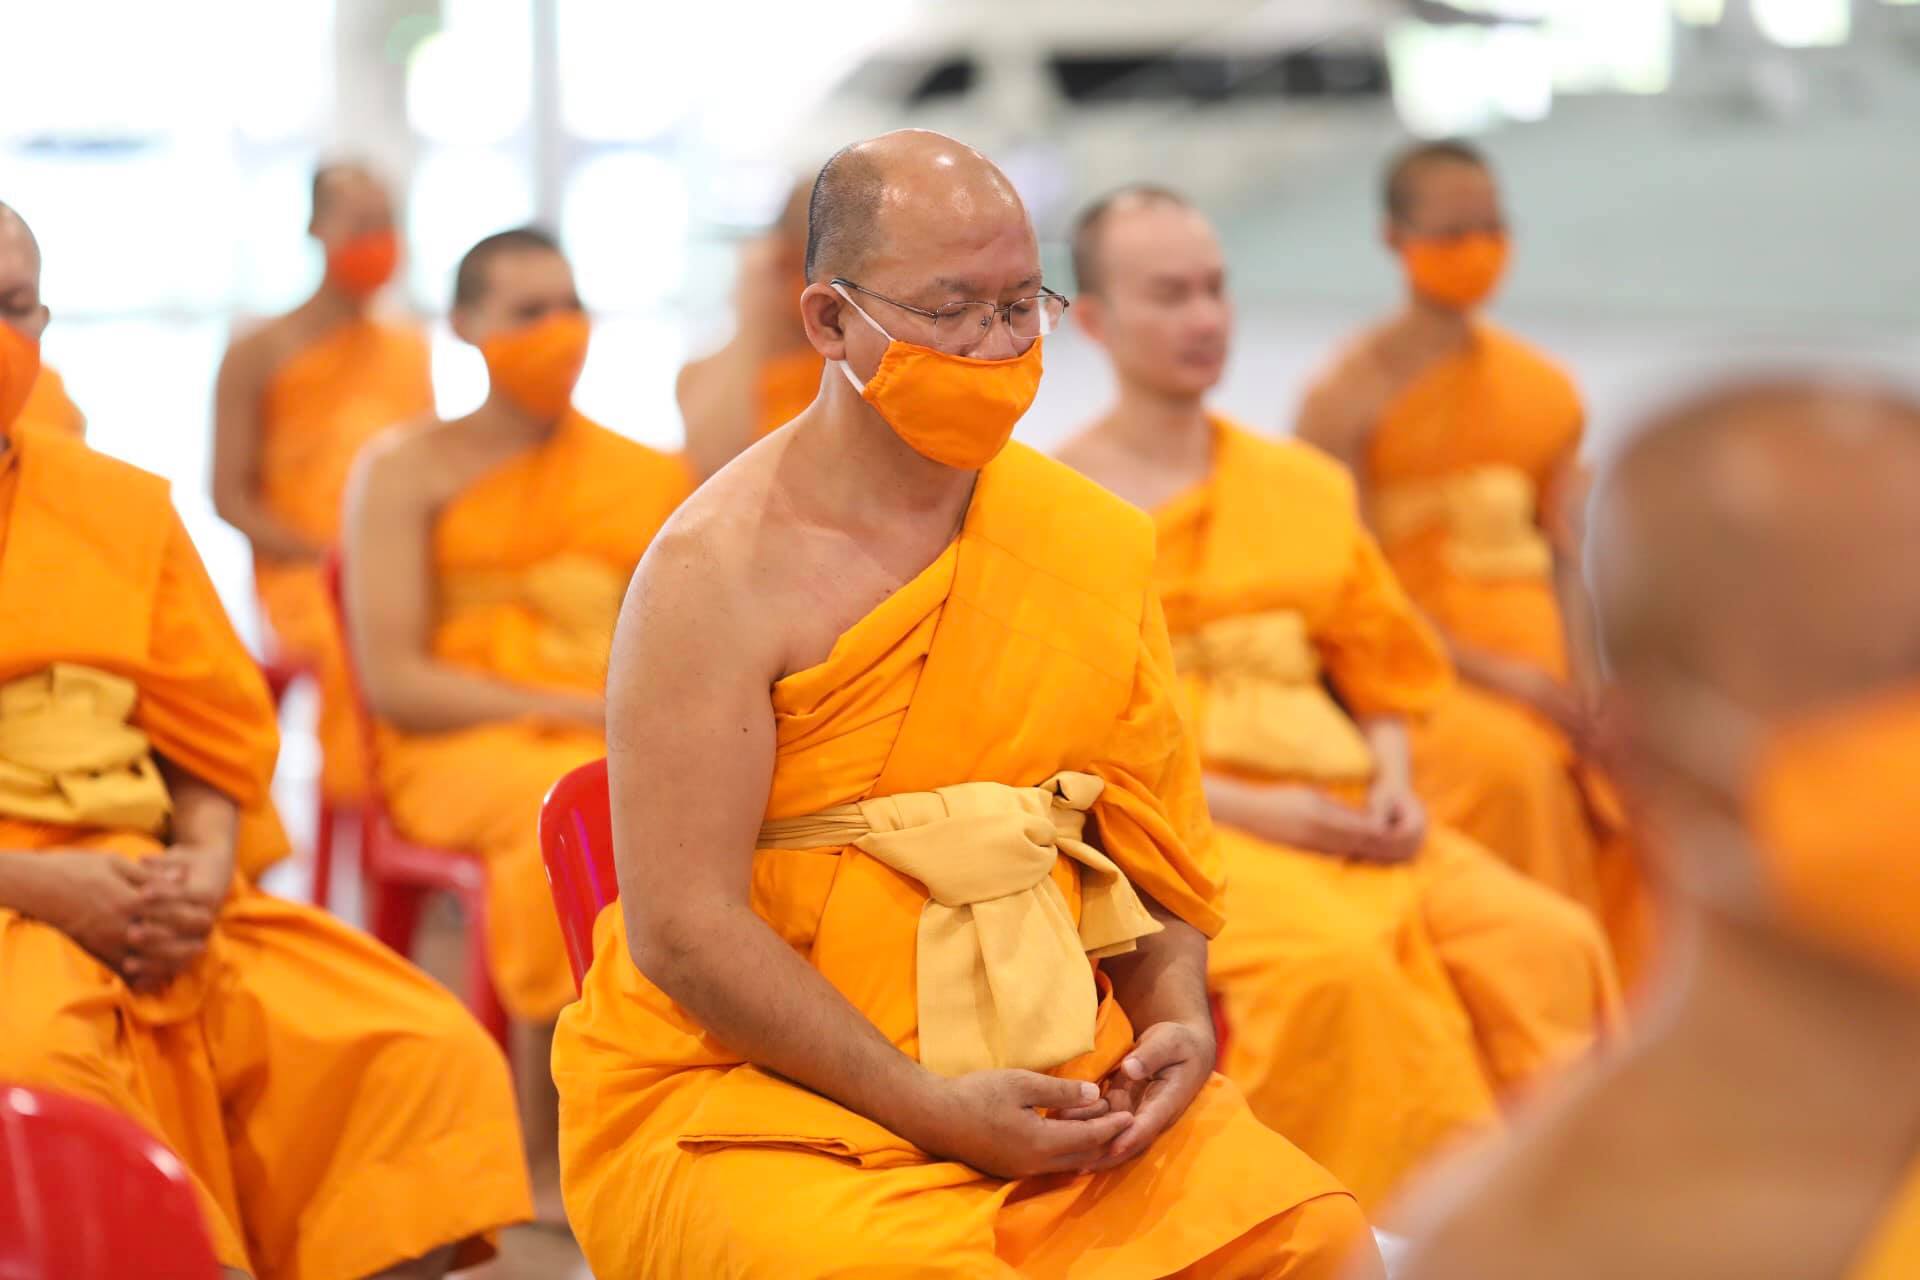 The Robe Offering Ceremony on Dhammachai Day, 27 Aug 2020